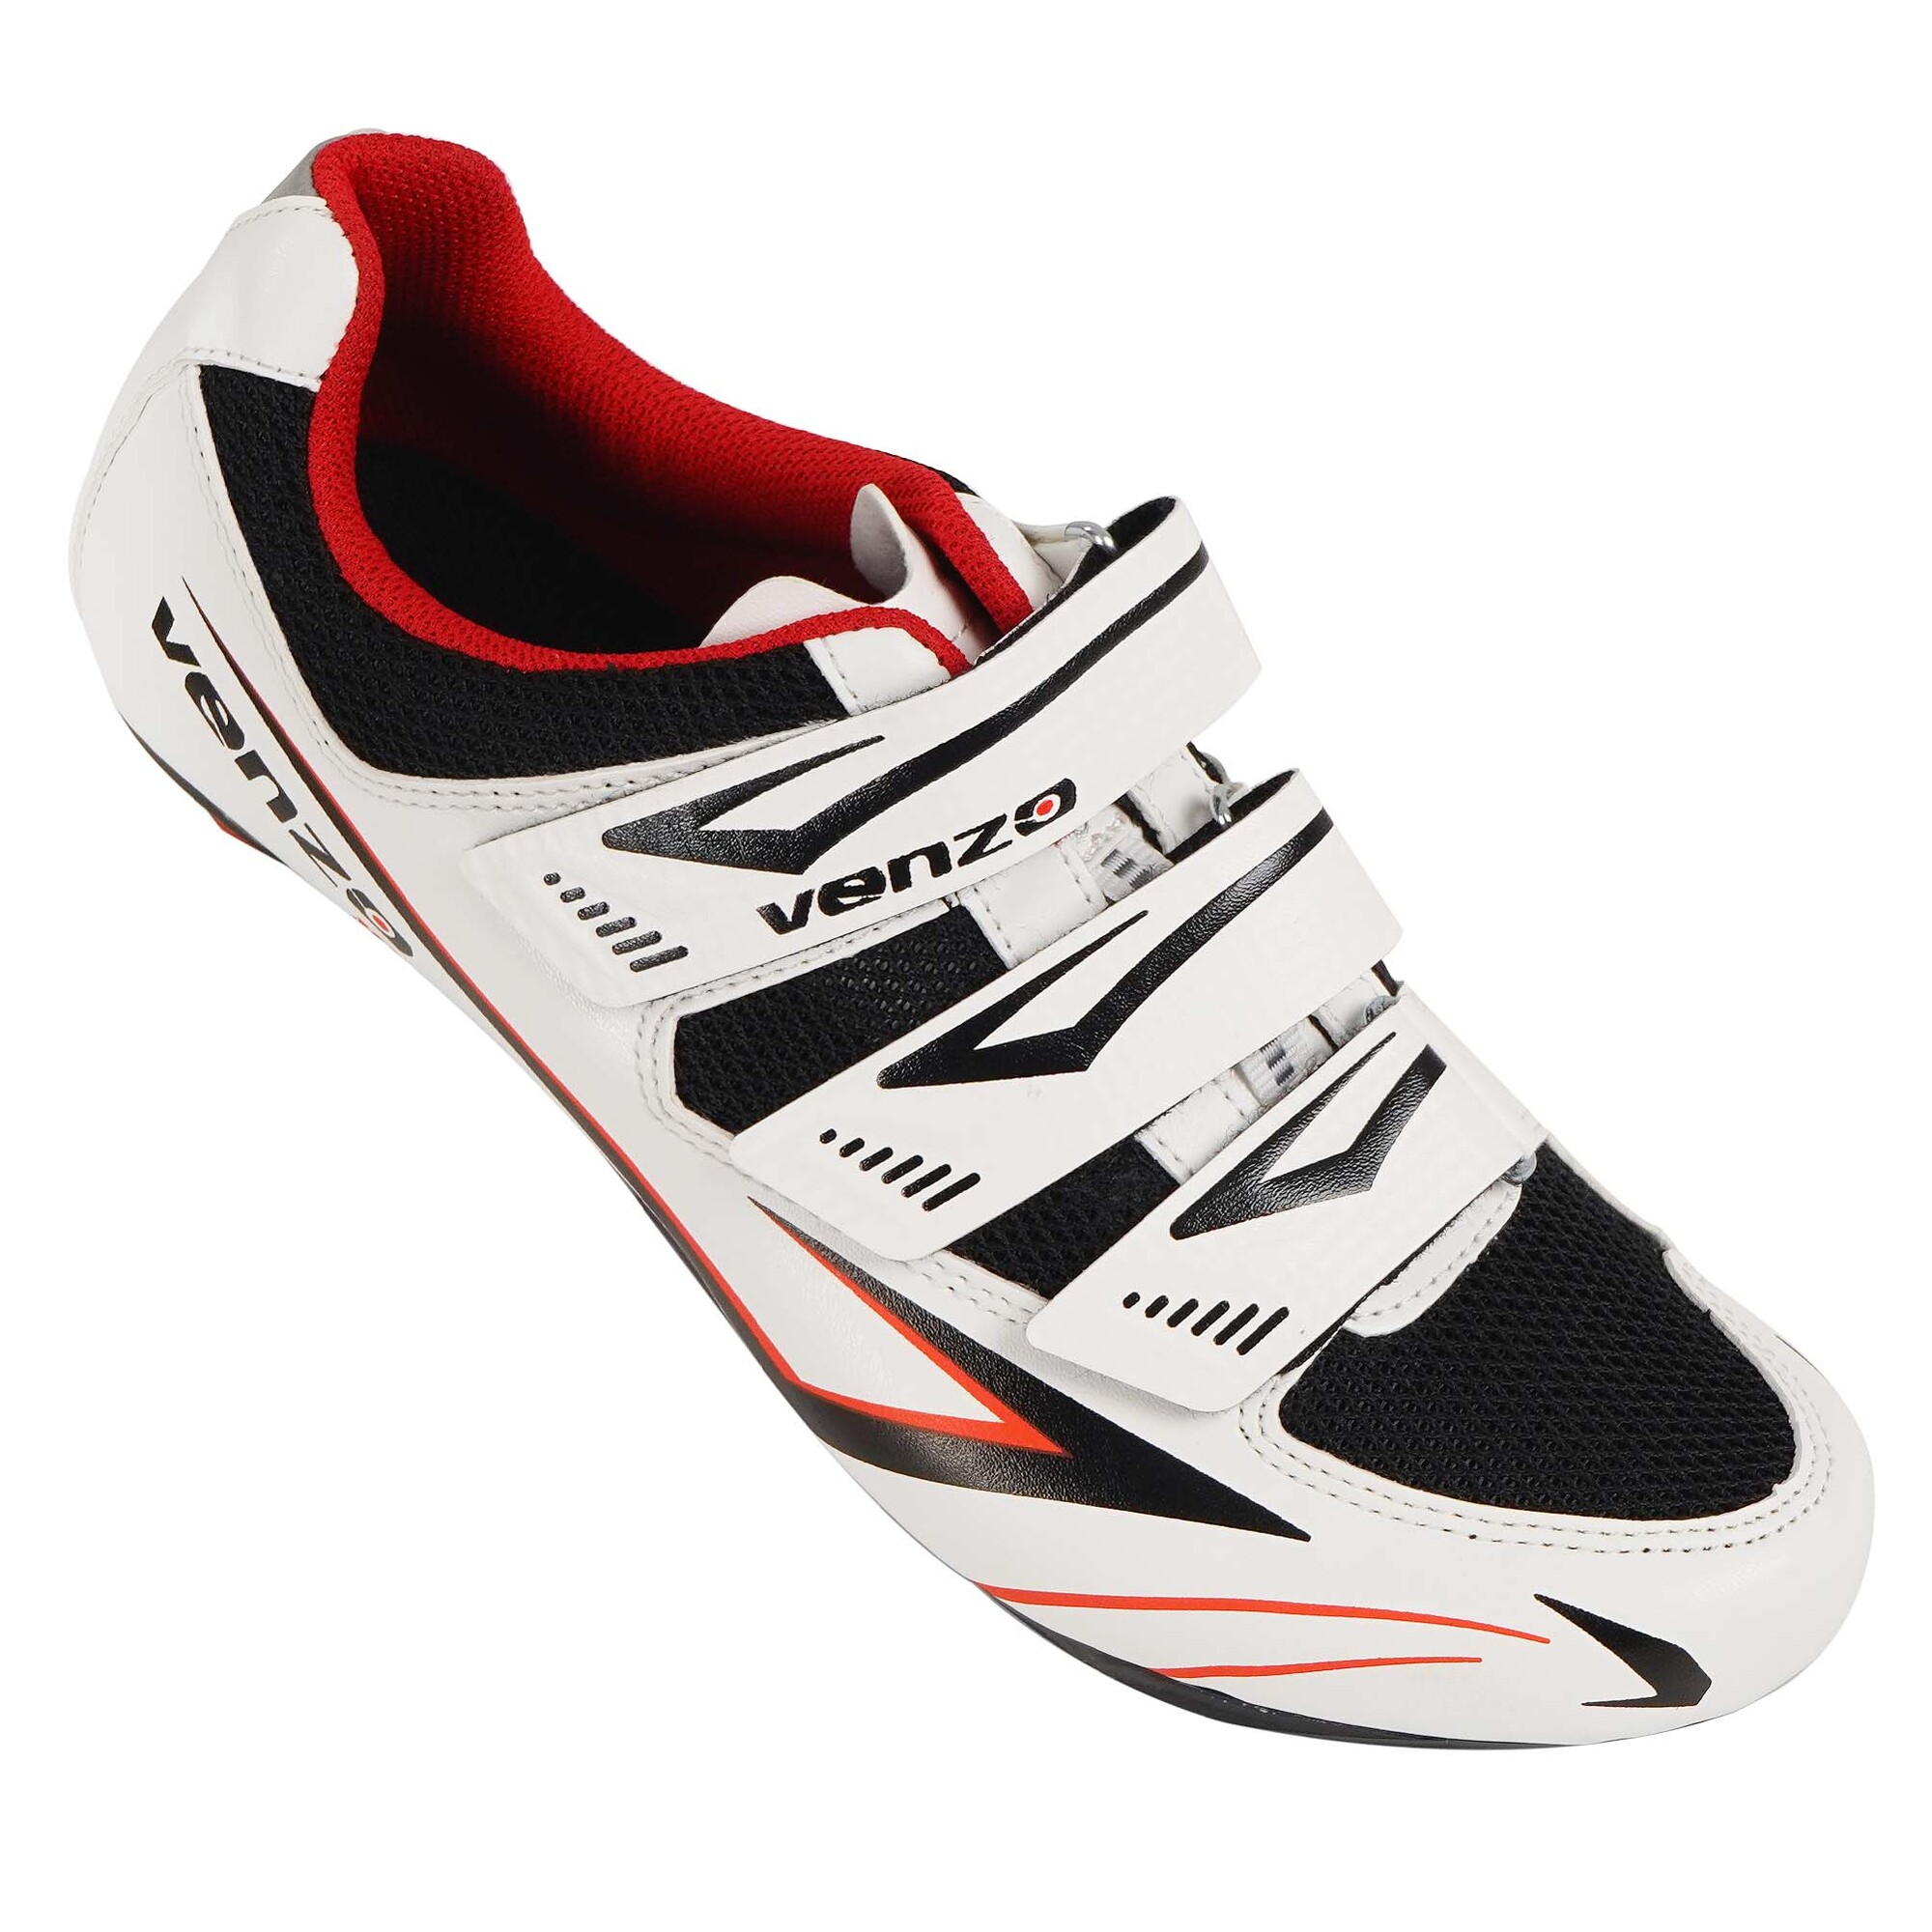 Venzo Road Bike For Shimano SPD SL Look Cycling Bicycle Shoes 50